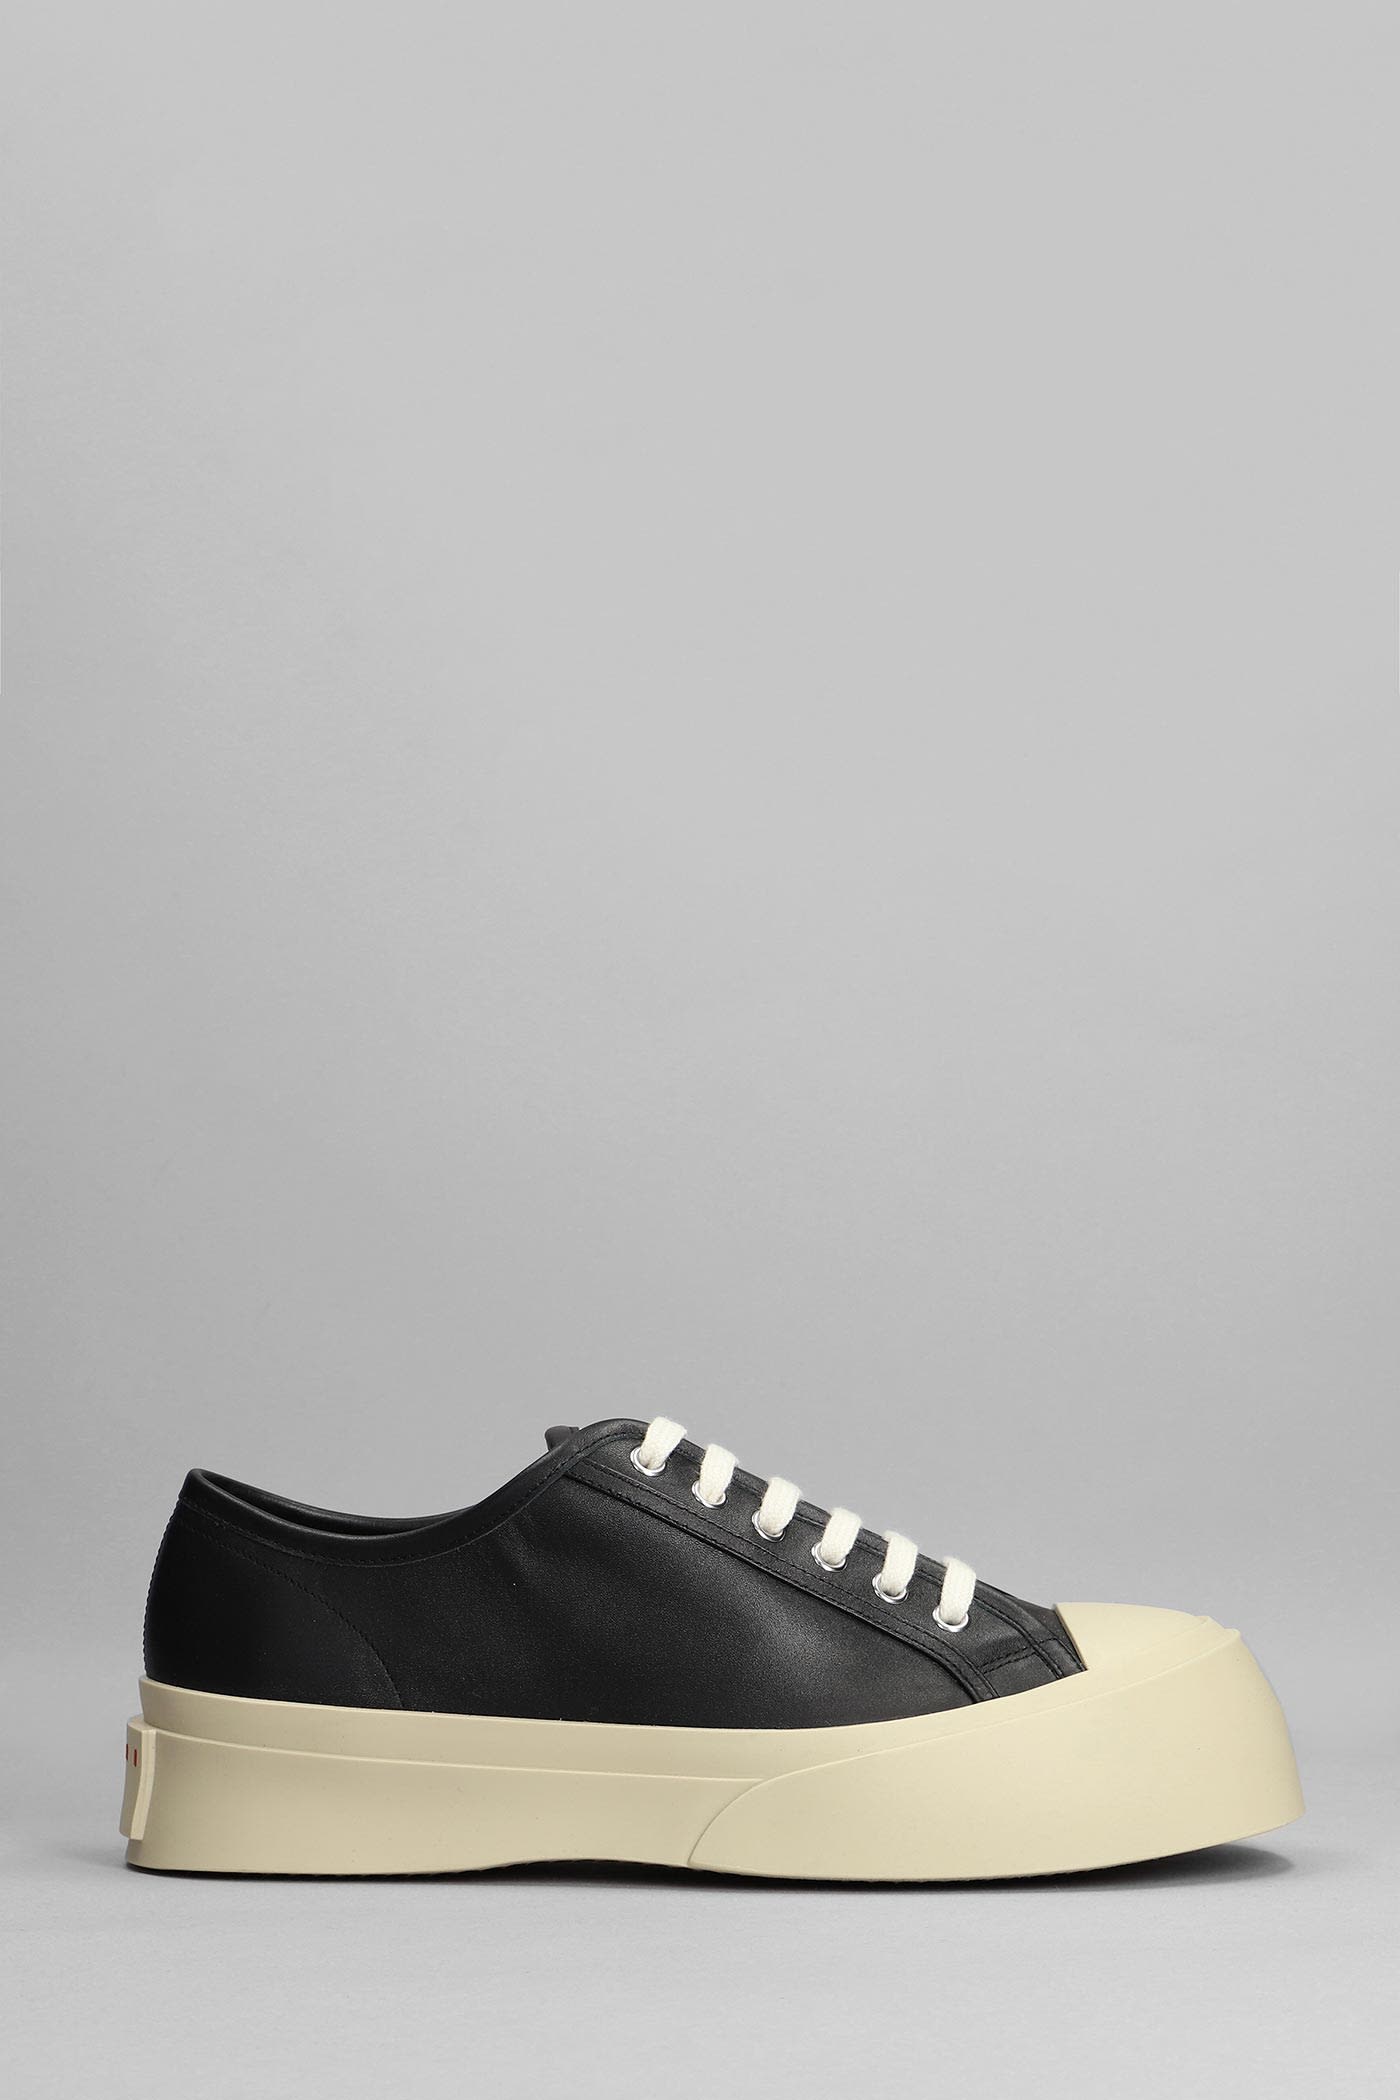 Marni Sneakers In Black Leather